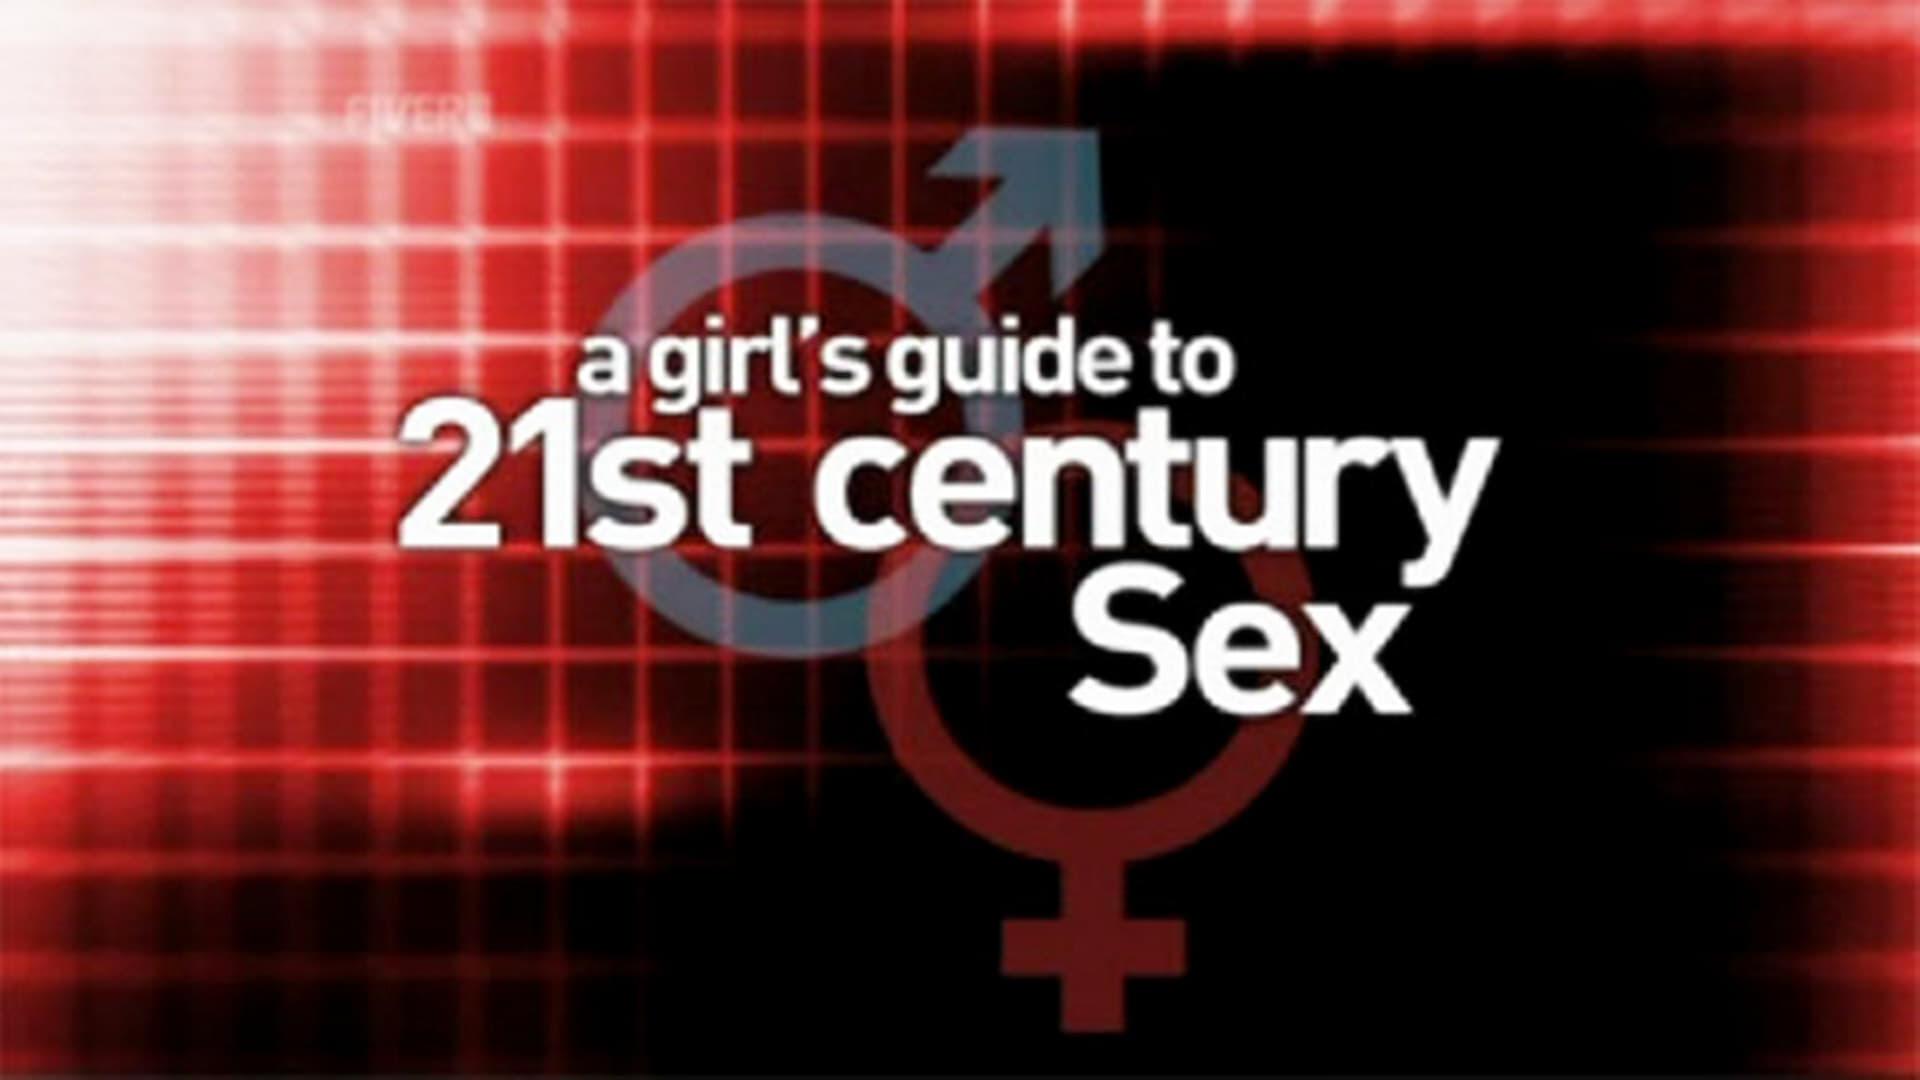 A Girl's Guide to 21st Century Sex backdrop